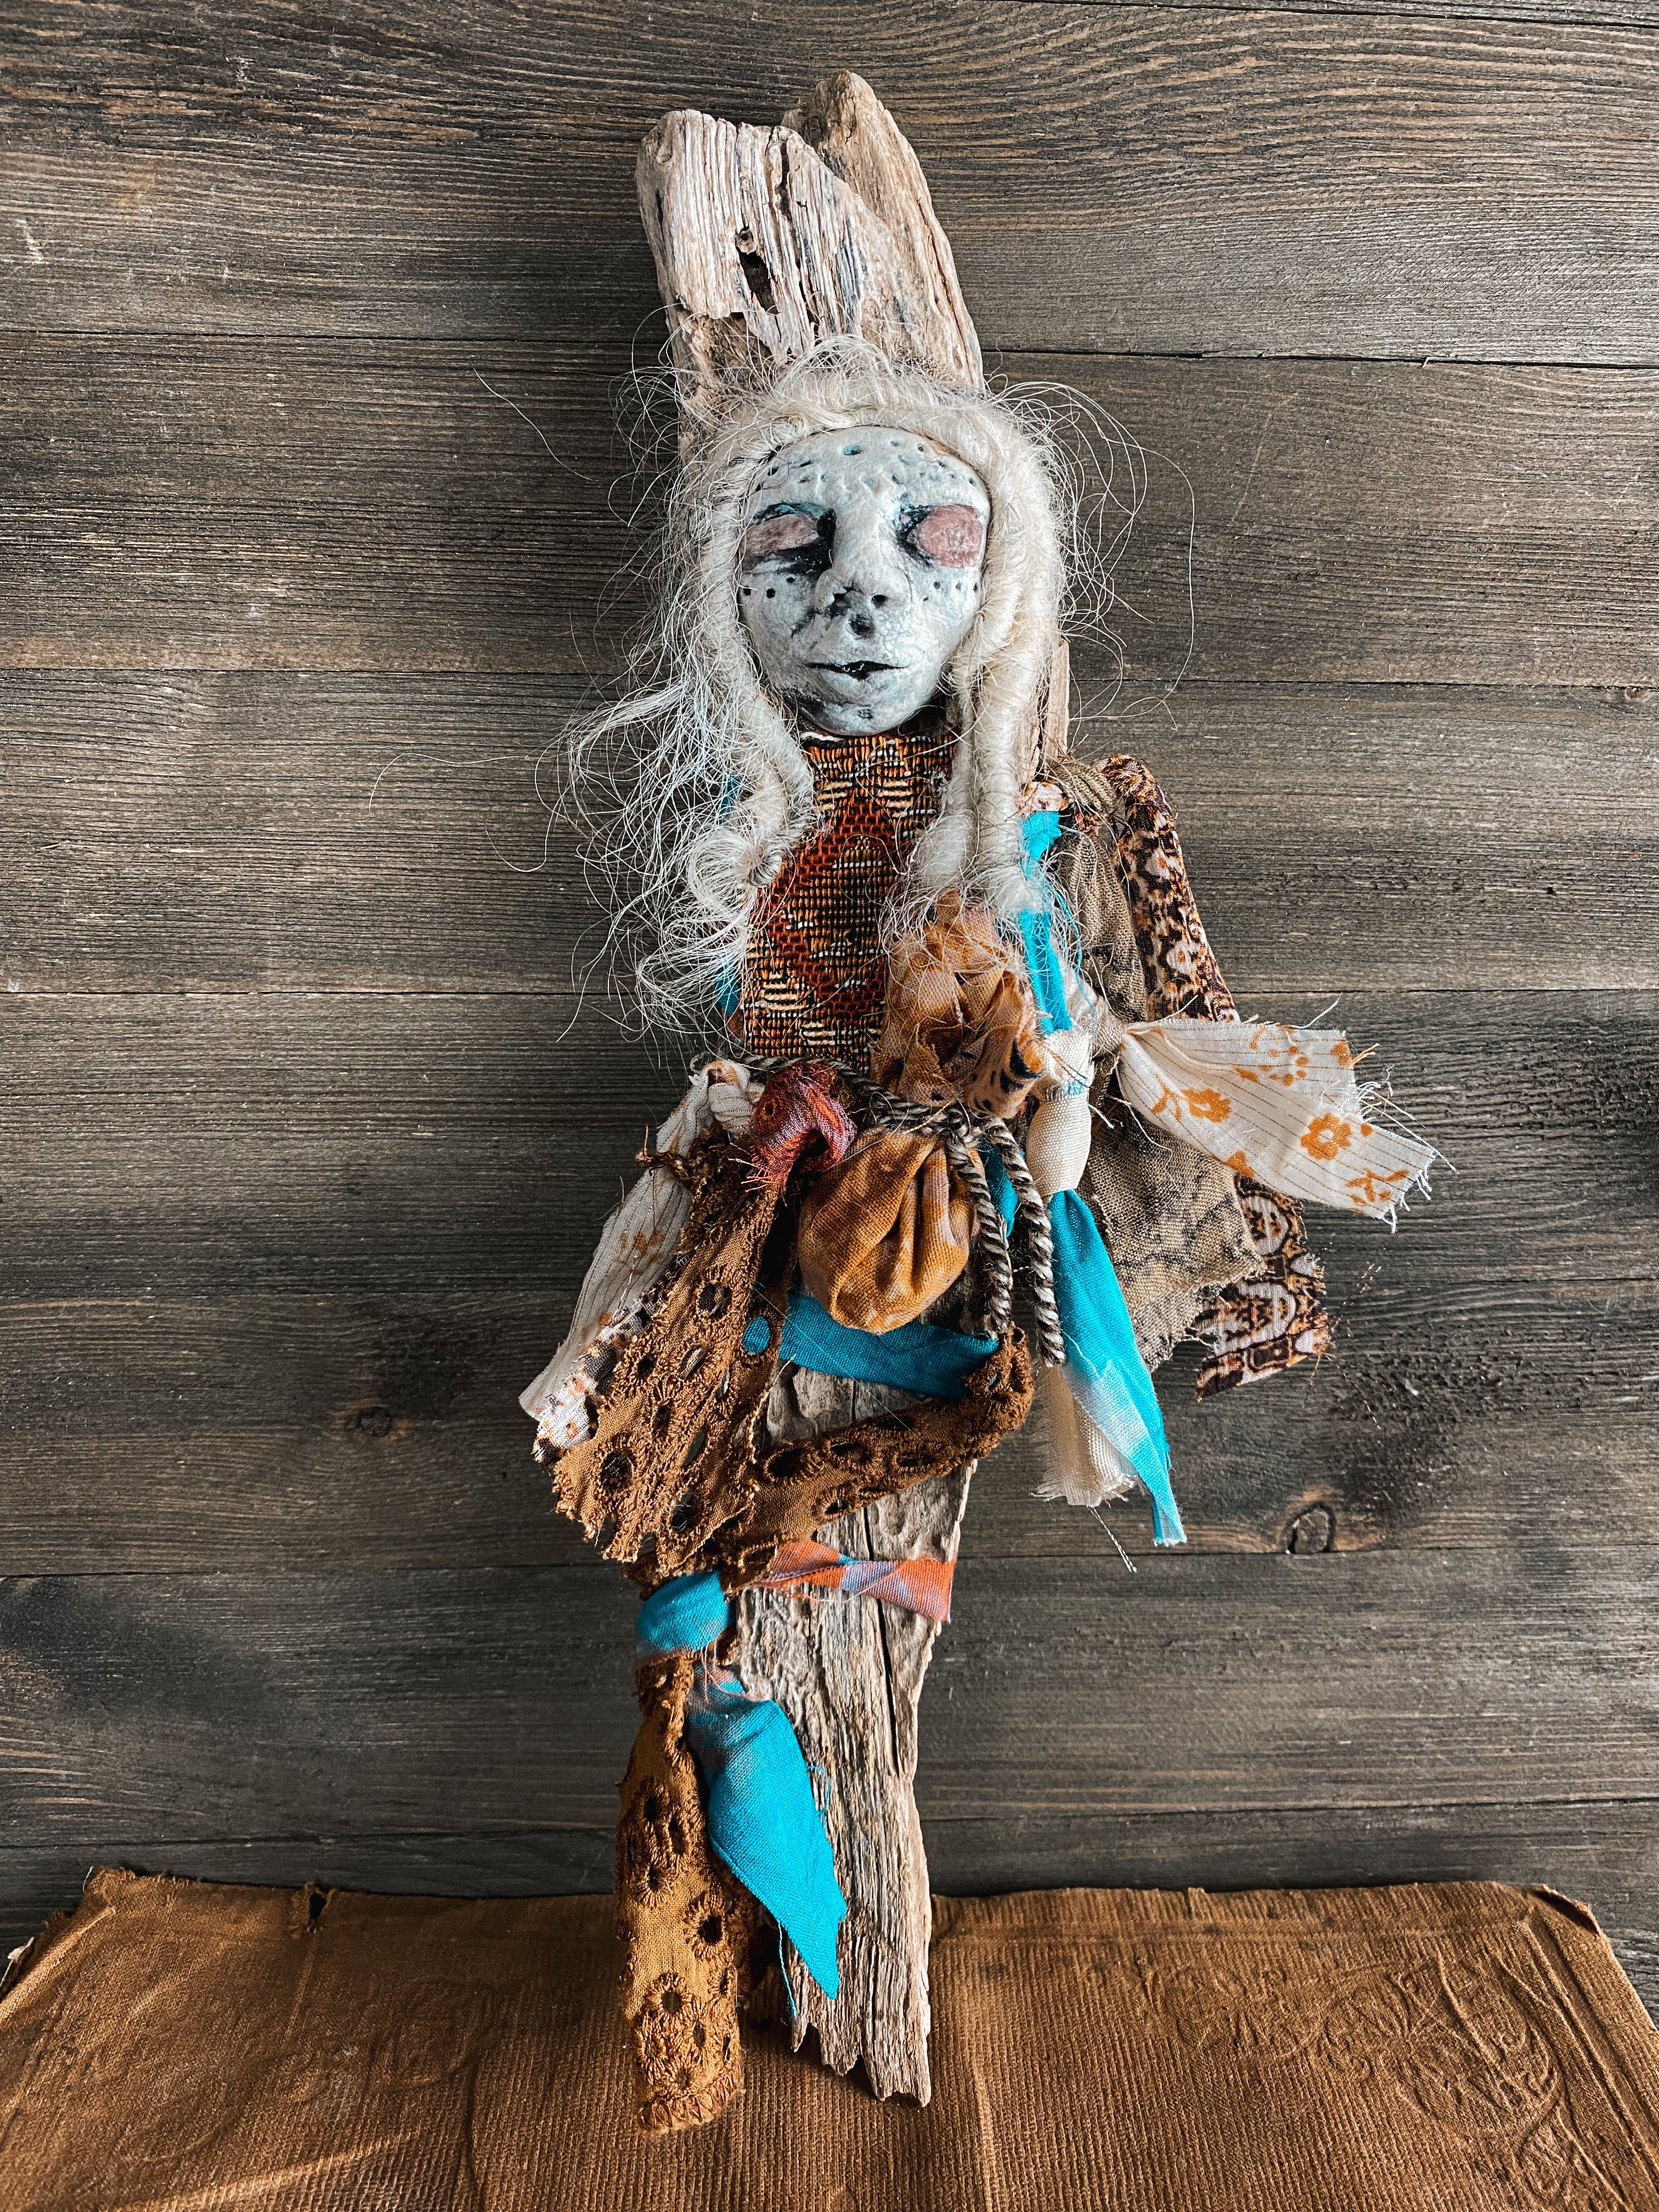 She of Letting Go - Sacred Medicine Doll for Letting go, Non-Attachment and Surrender